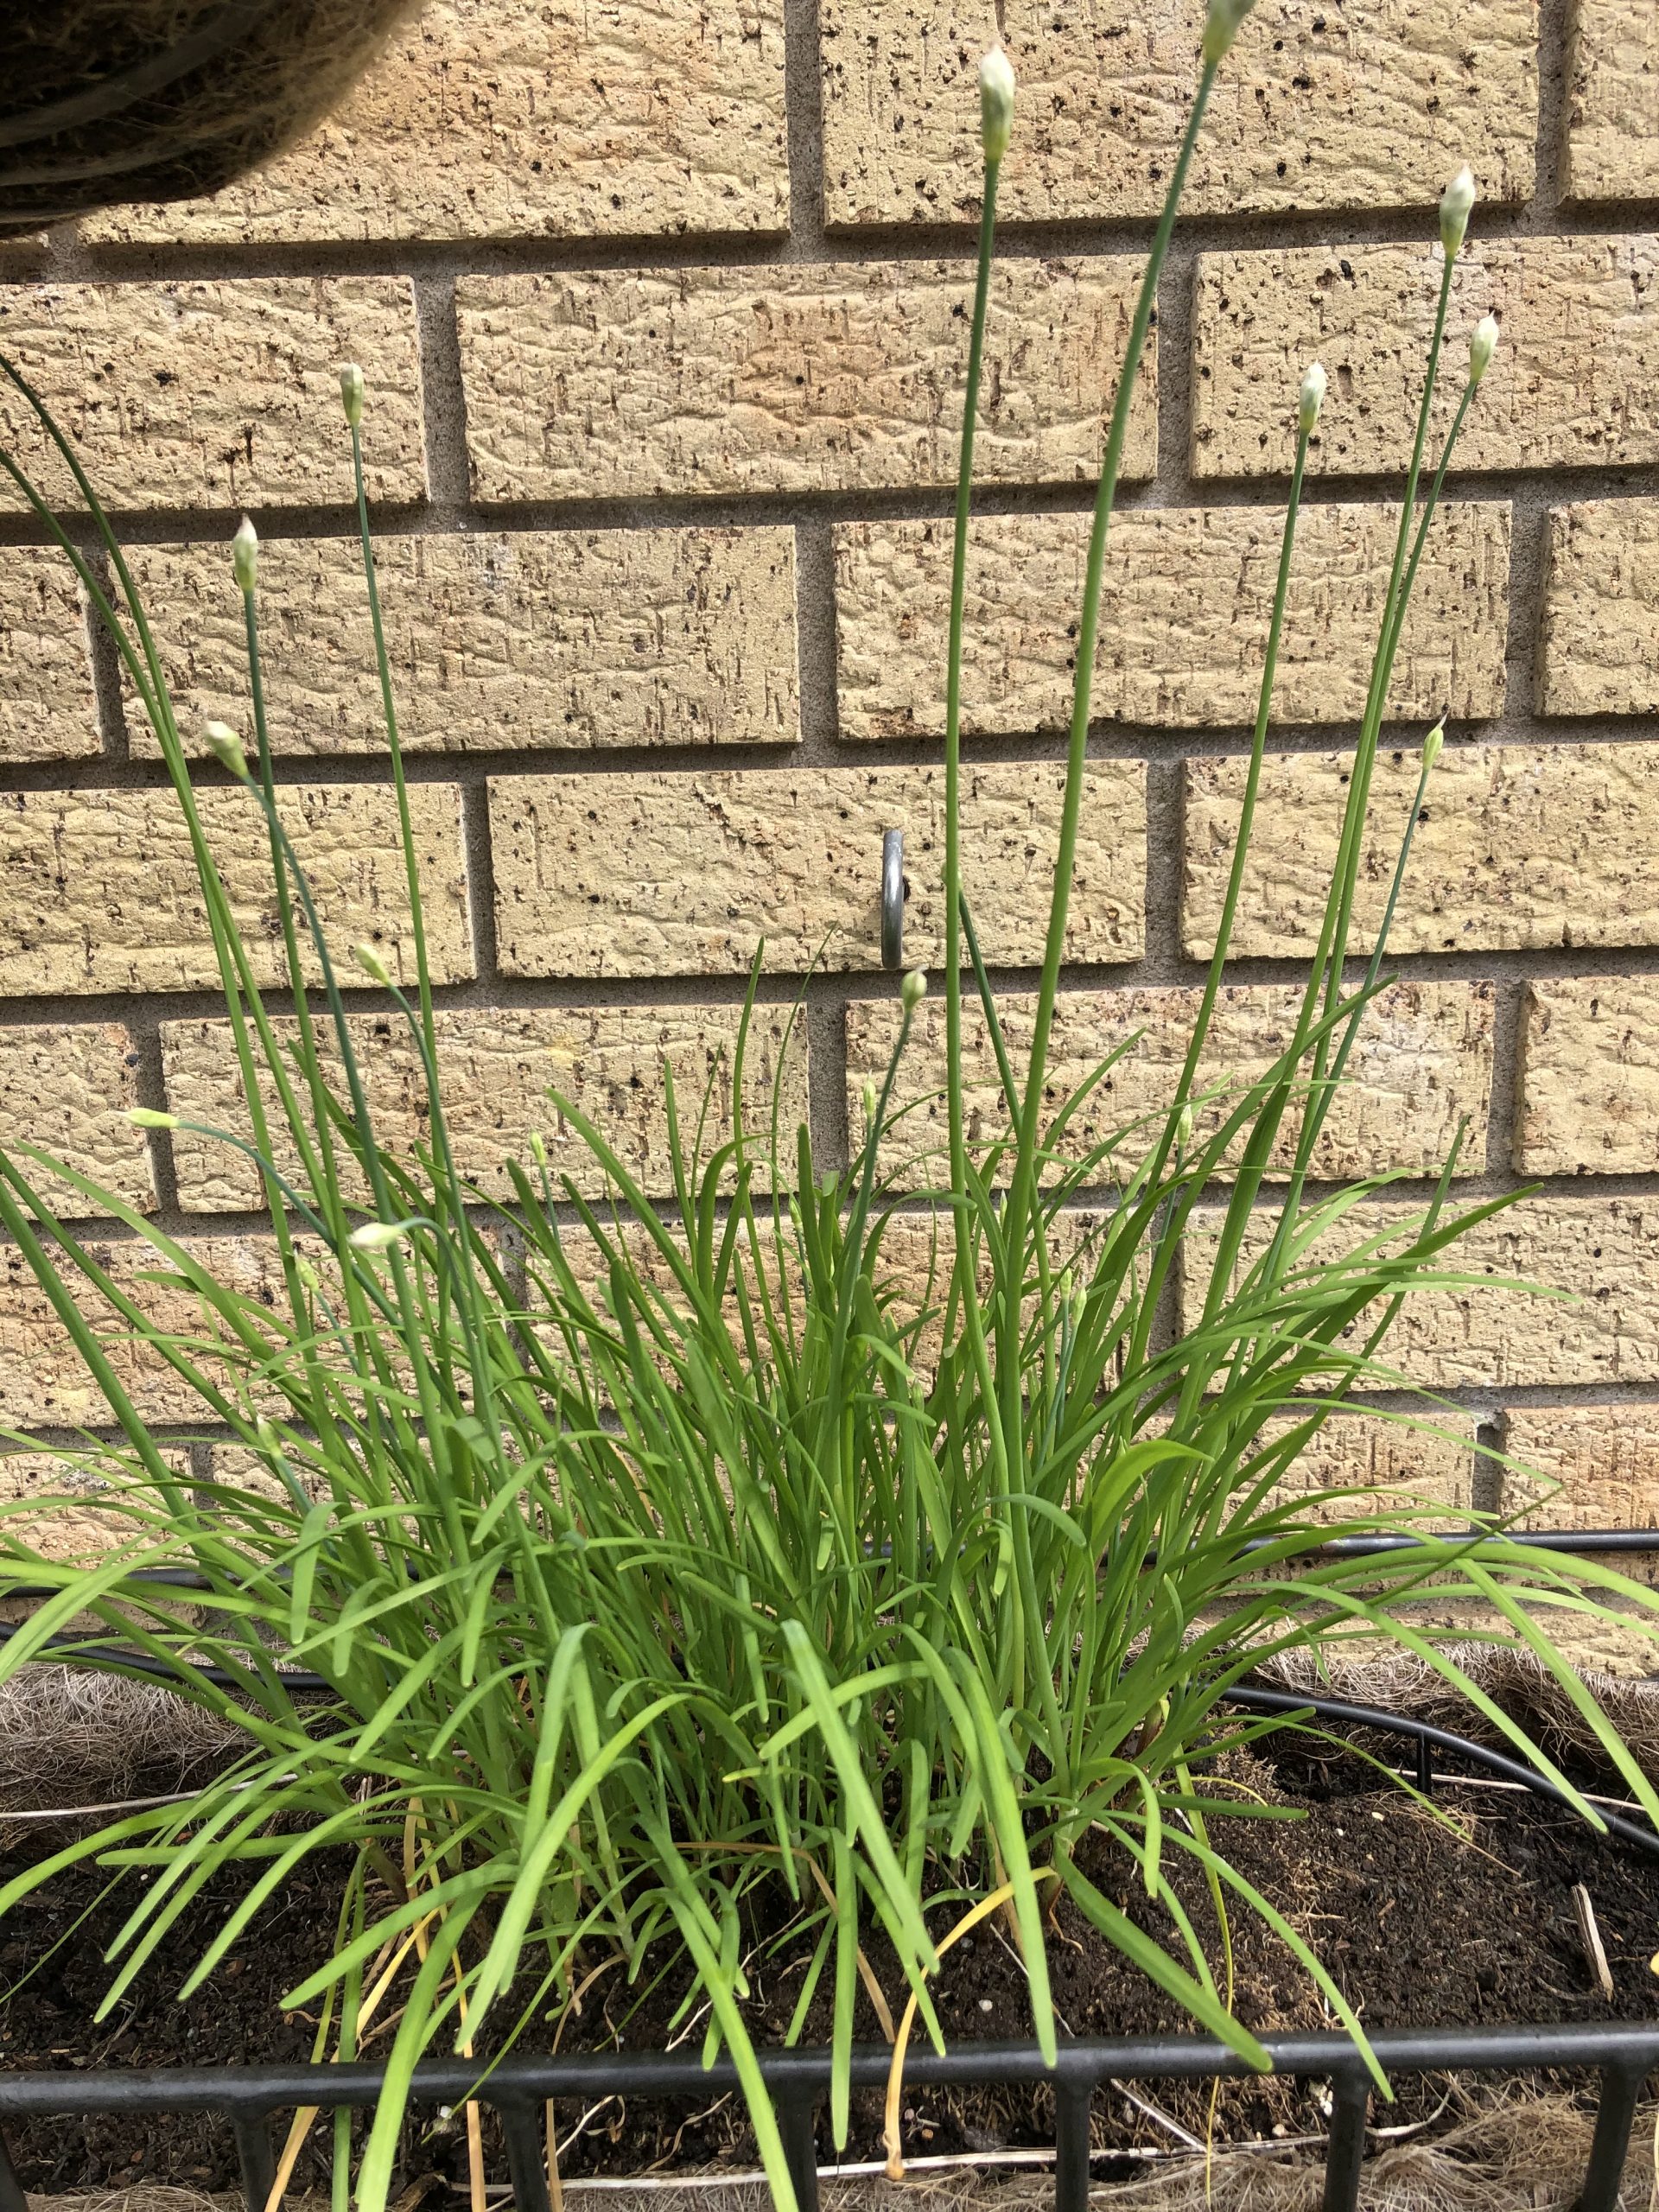 Chinese chives in wall basket - 9/8/20